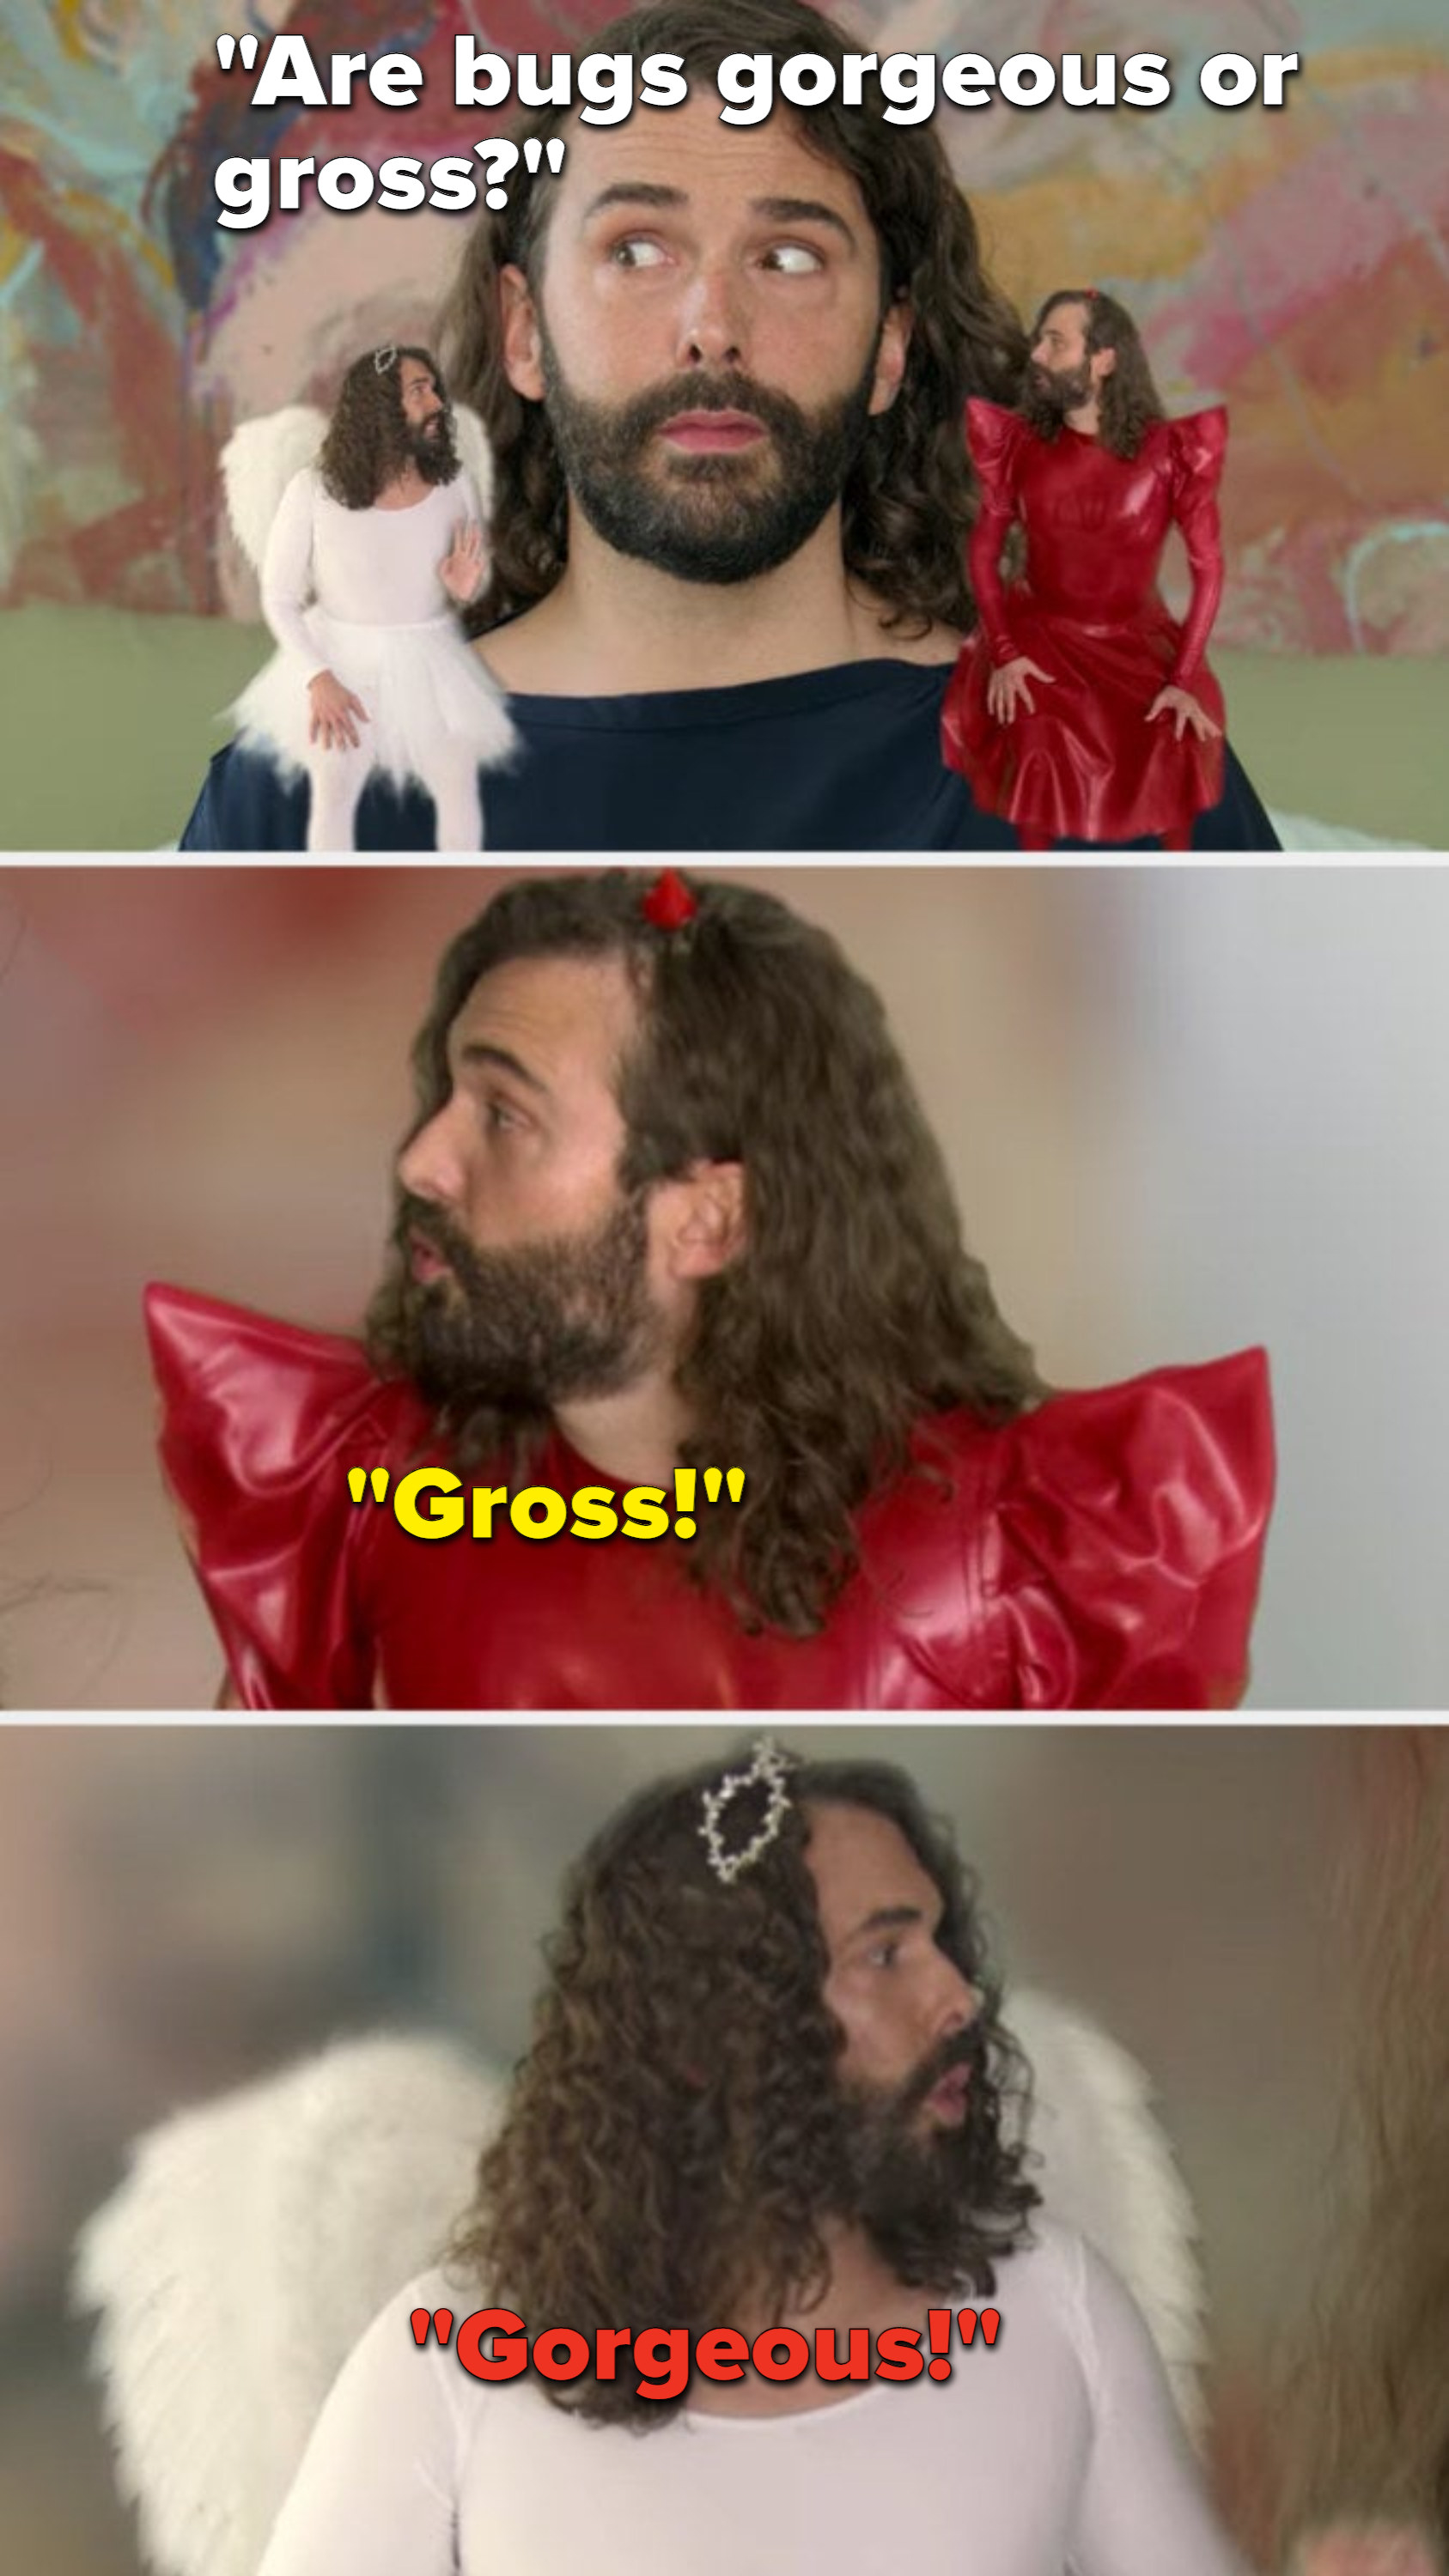 Jonathan Van Ness ponders whether bugs are gorgeous or gross